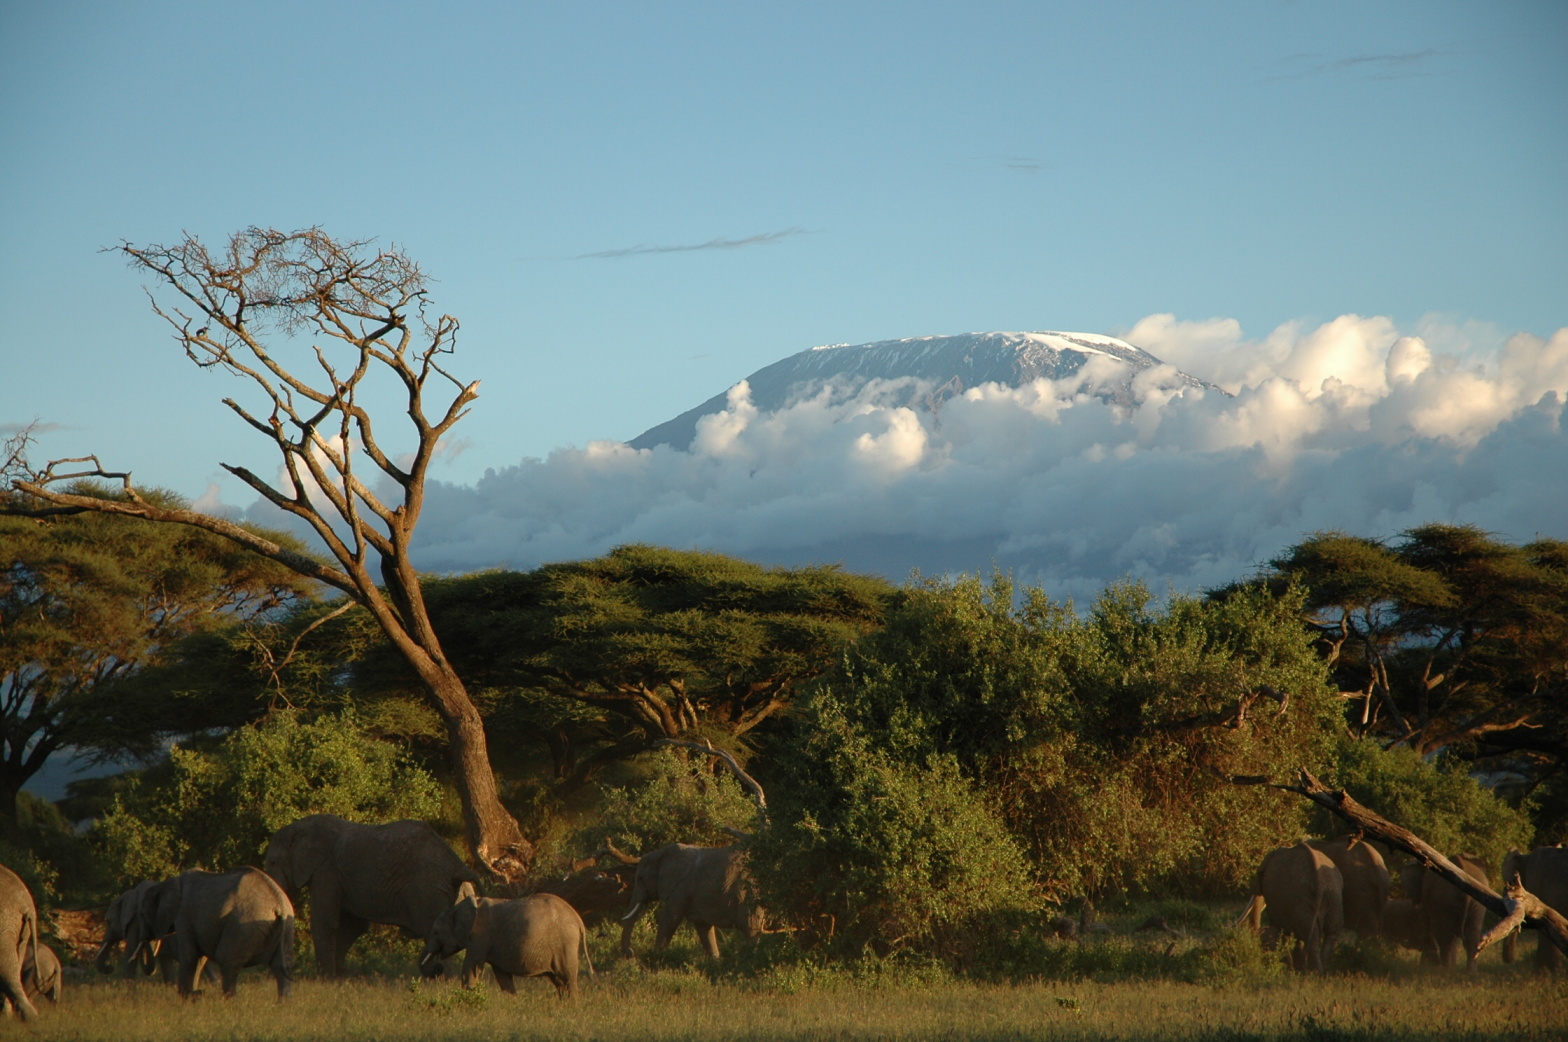 In the shadow of Kilimanjaro